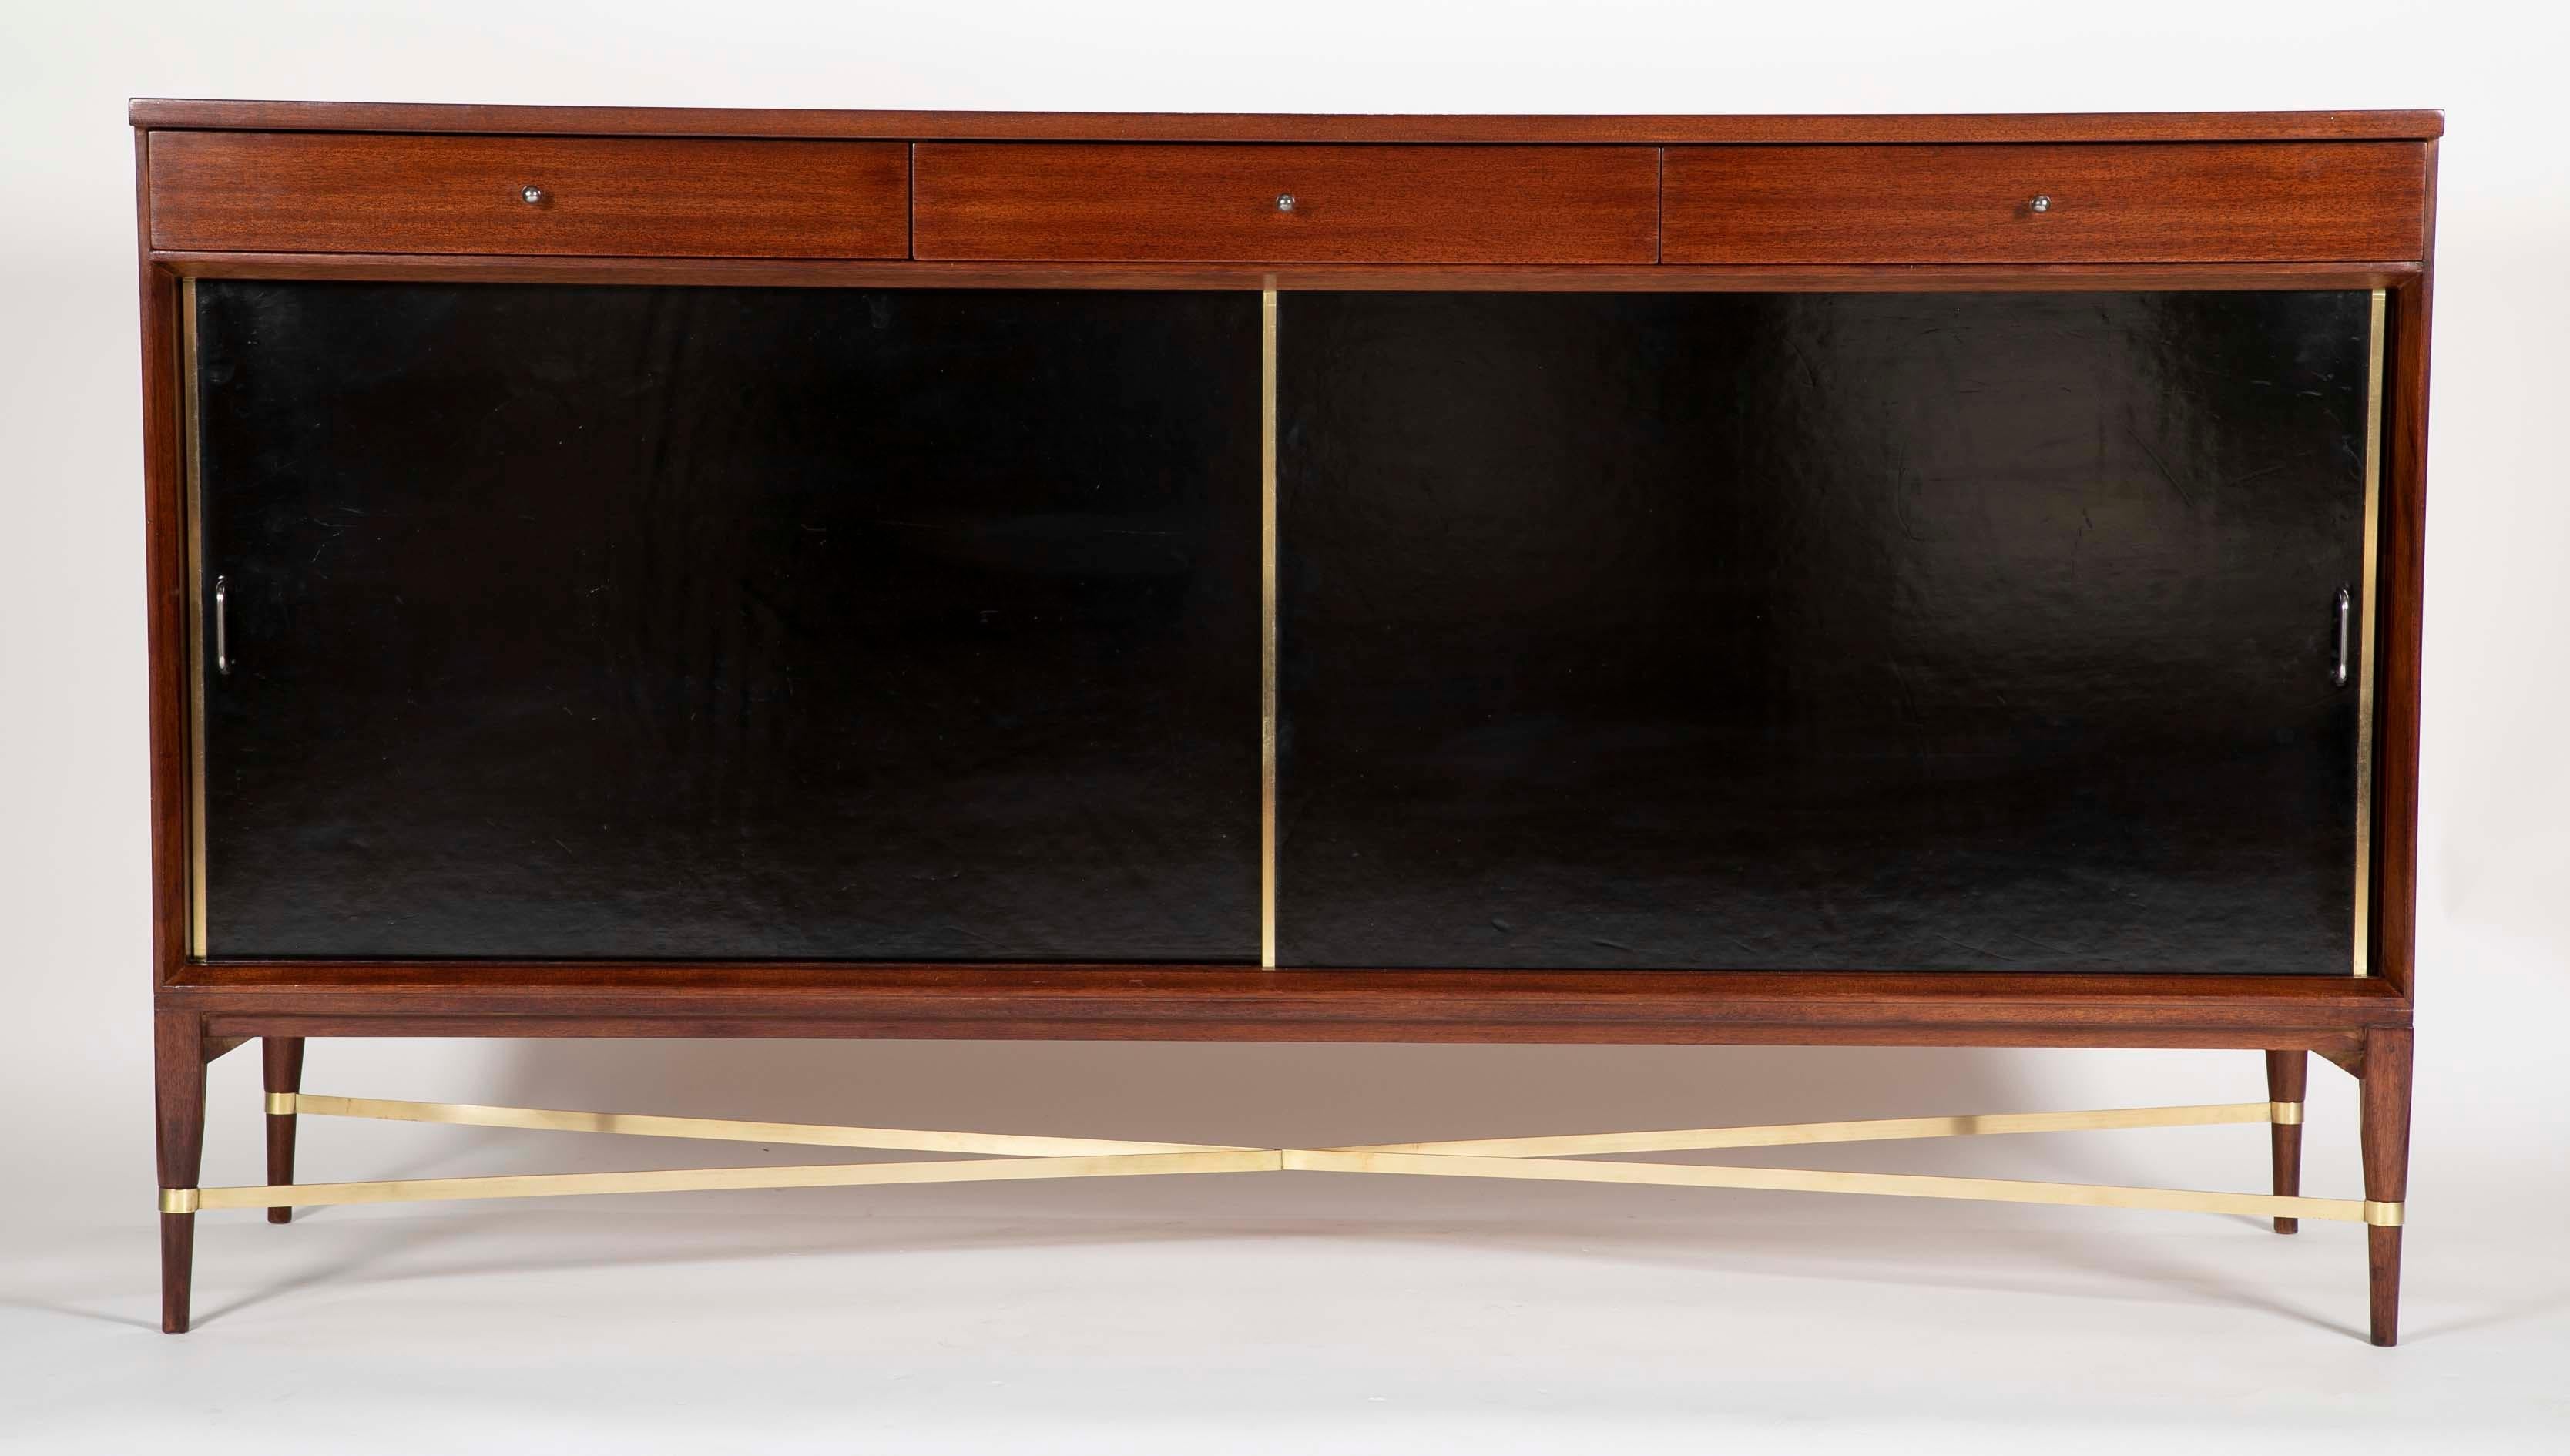 A side board designed by Paul McCobb for Calvin furniture, circa 1965. Having two sliding leather clad doors.